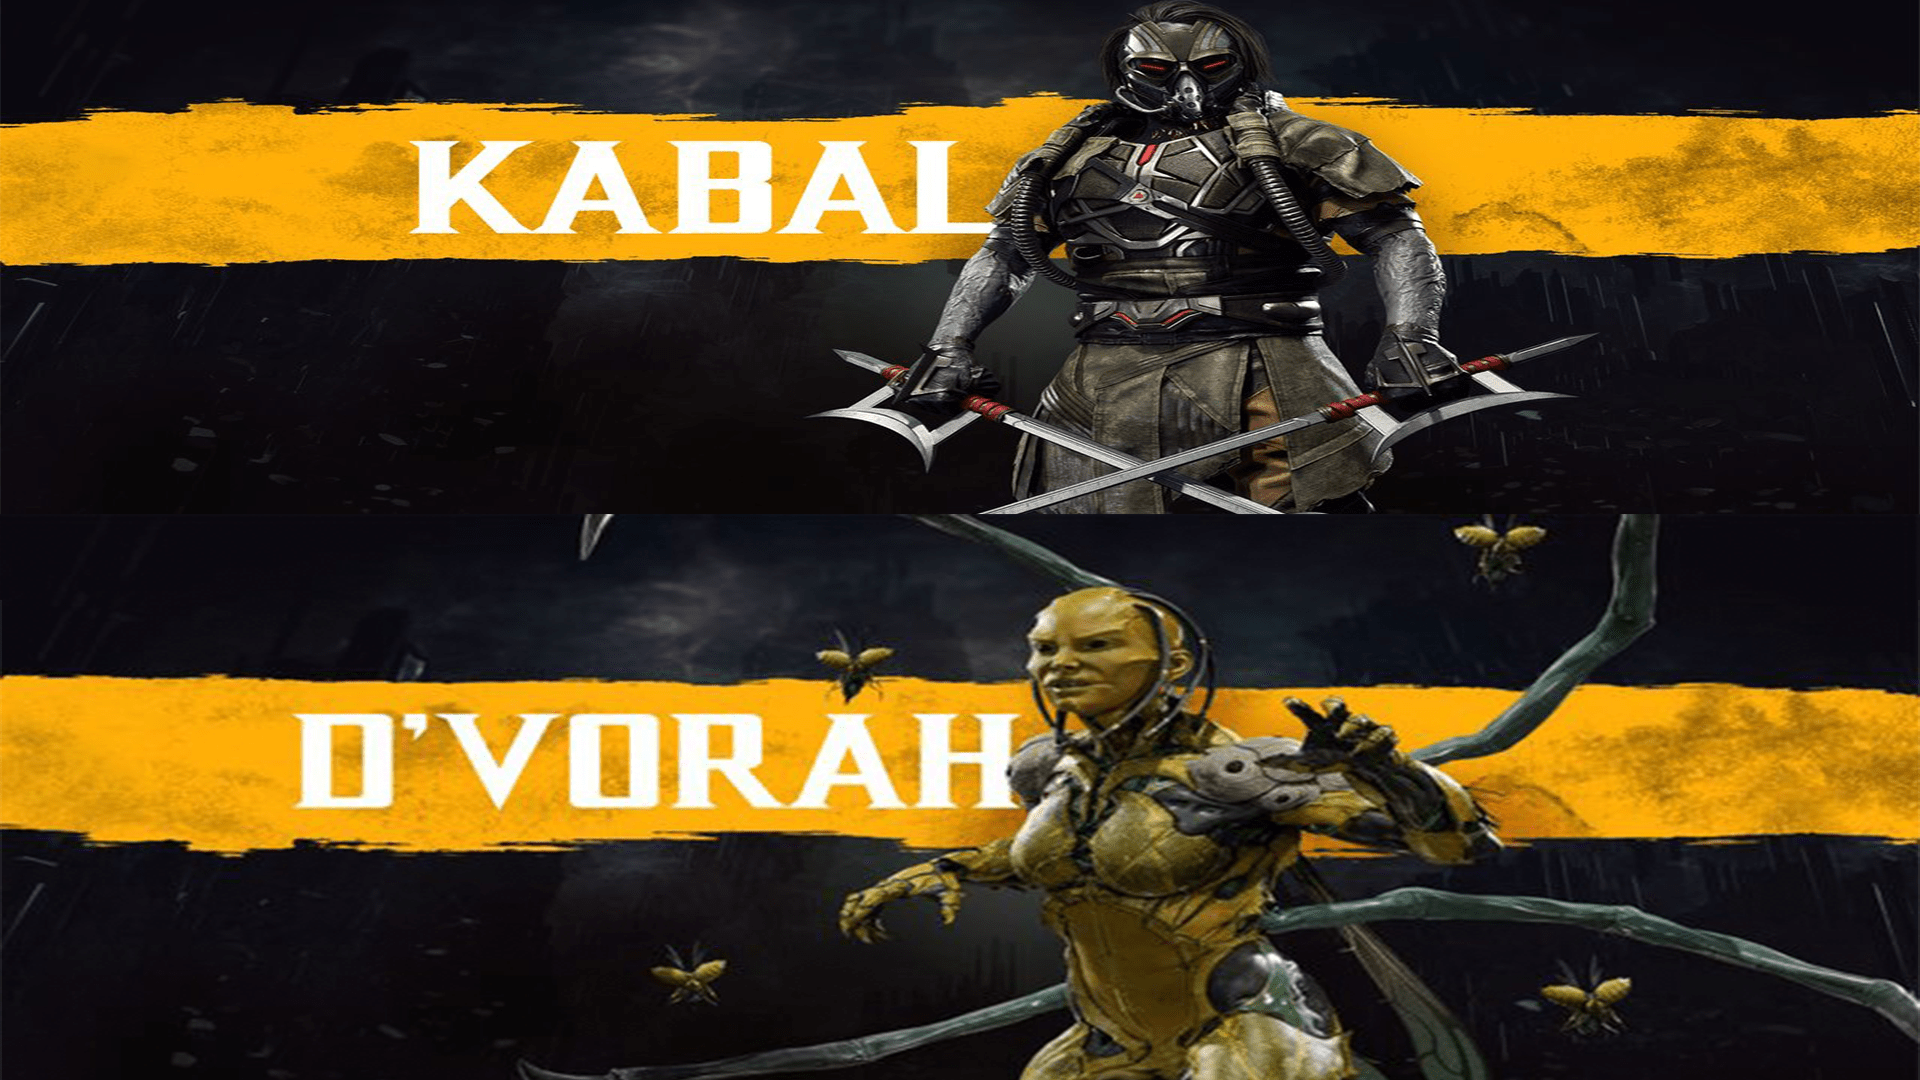 KABAL AND D'VORAH WILL FINISH YOU!